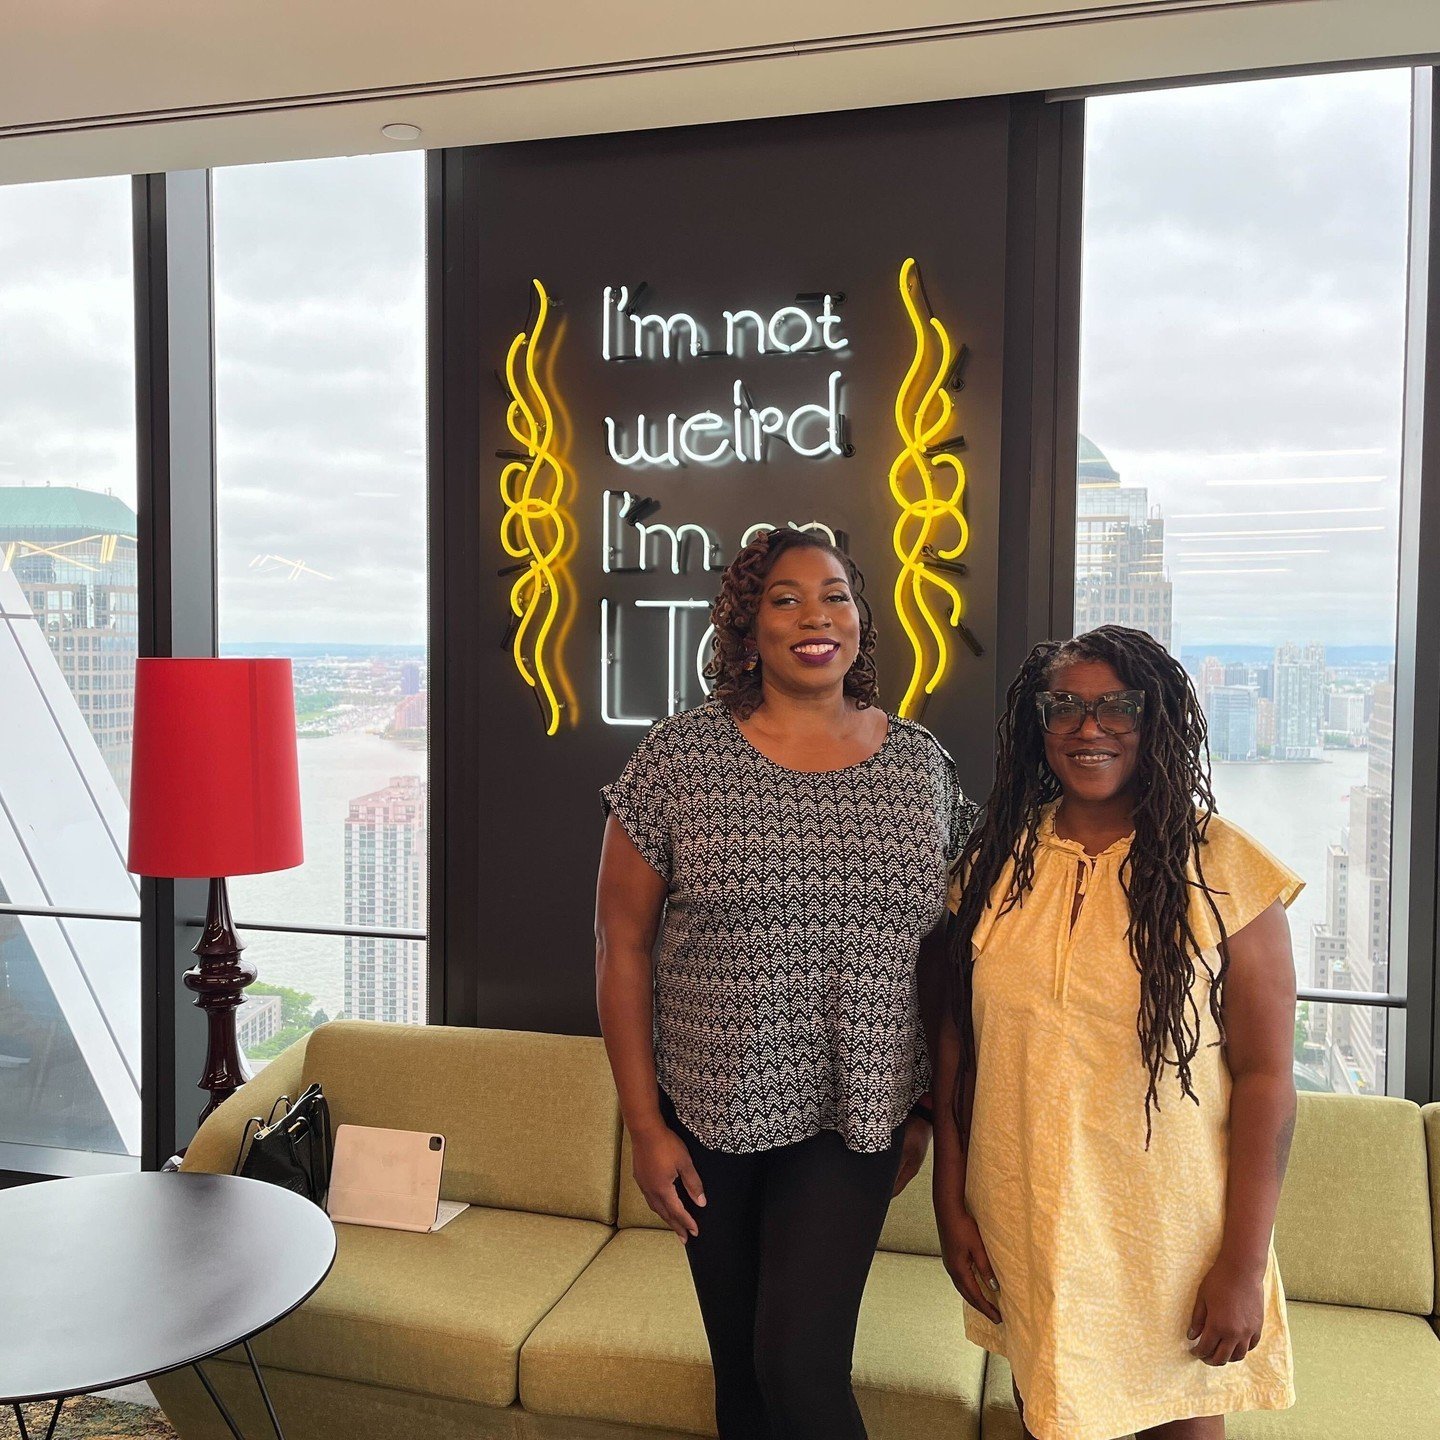 Two of NOCHI's Learning Skills for Life students were selected as finalists for a cocktail competition hosted by Tanqueray Gin! They were flown up to New York City to visit Diageo's offices and see their recipes come to life. We couldn't be prouder o